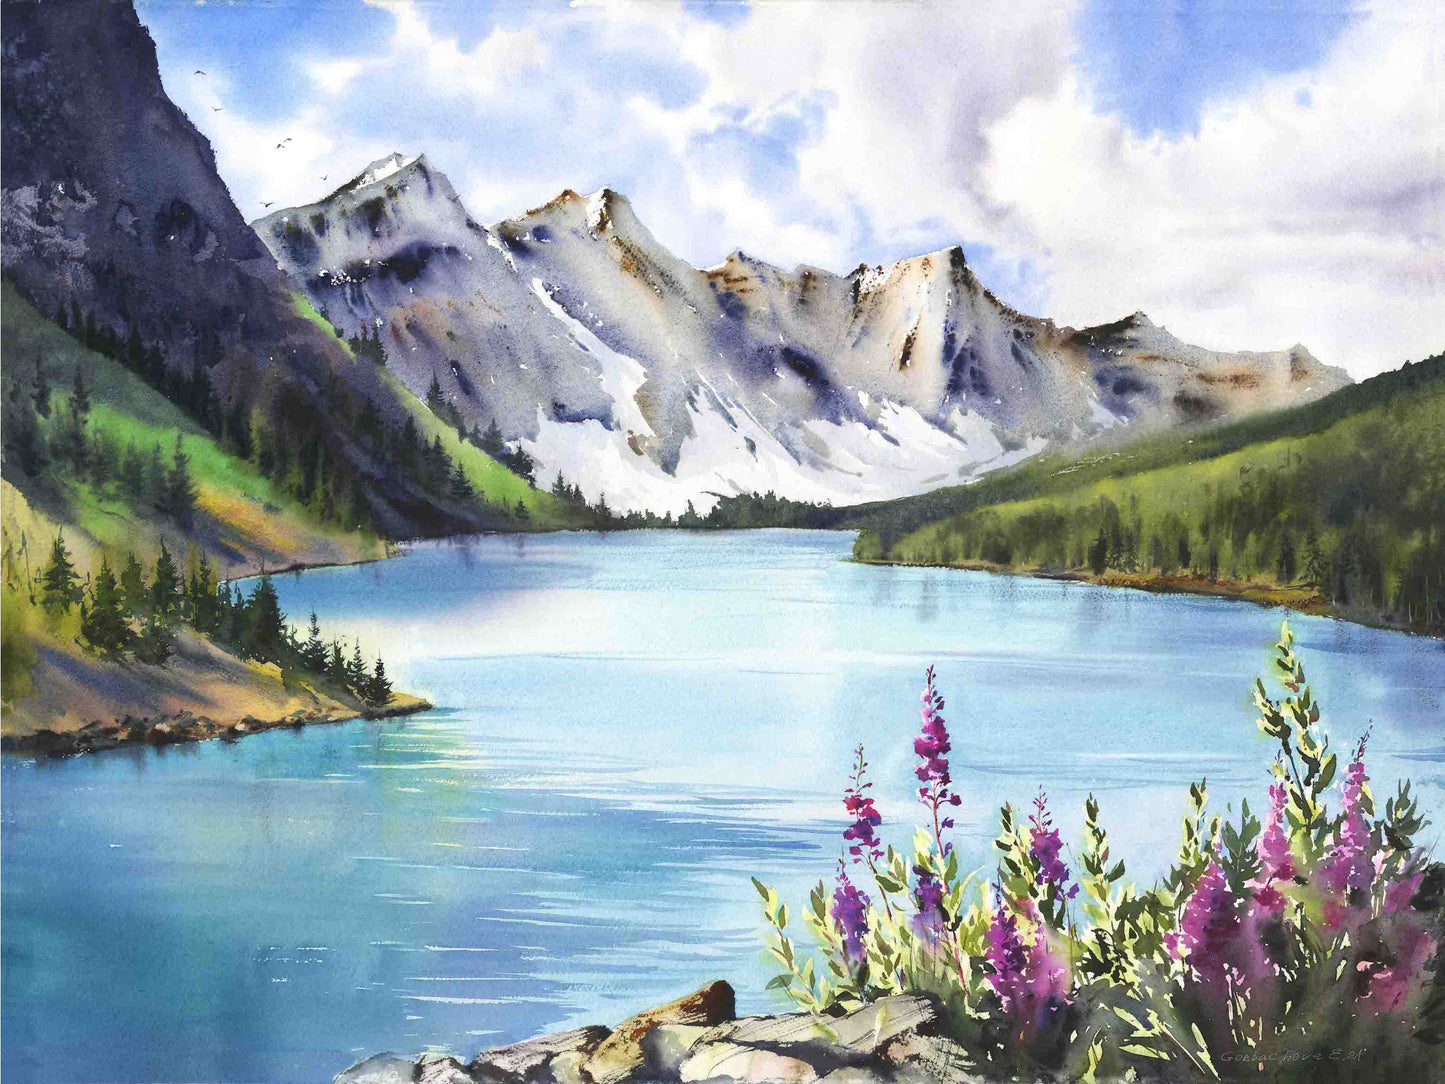 Mountain Wildflowers Art Print, Nature Wall Decor, Turquoise Lake Landscape Painting, Modern Office Wall Decoration